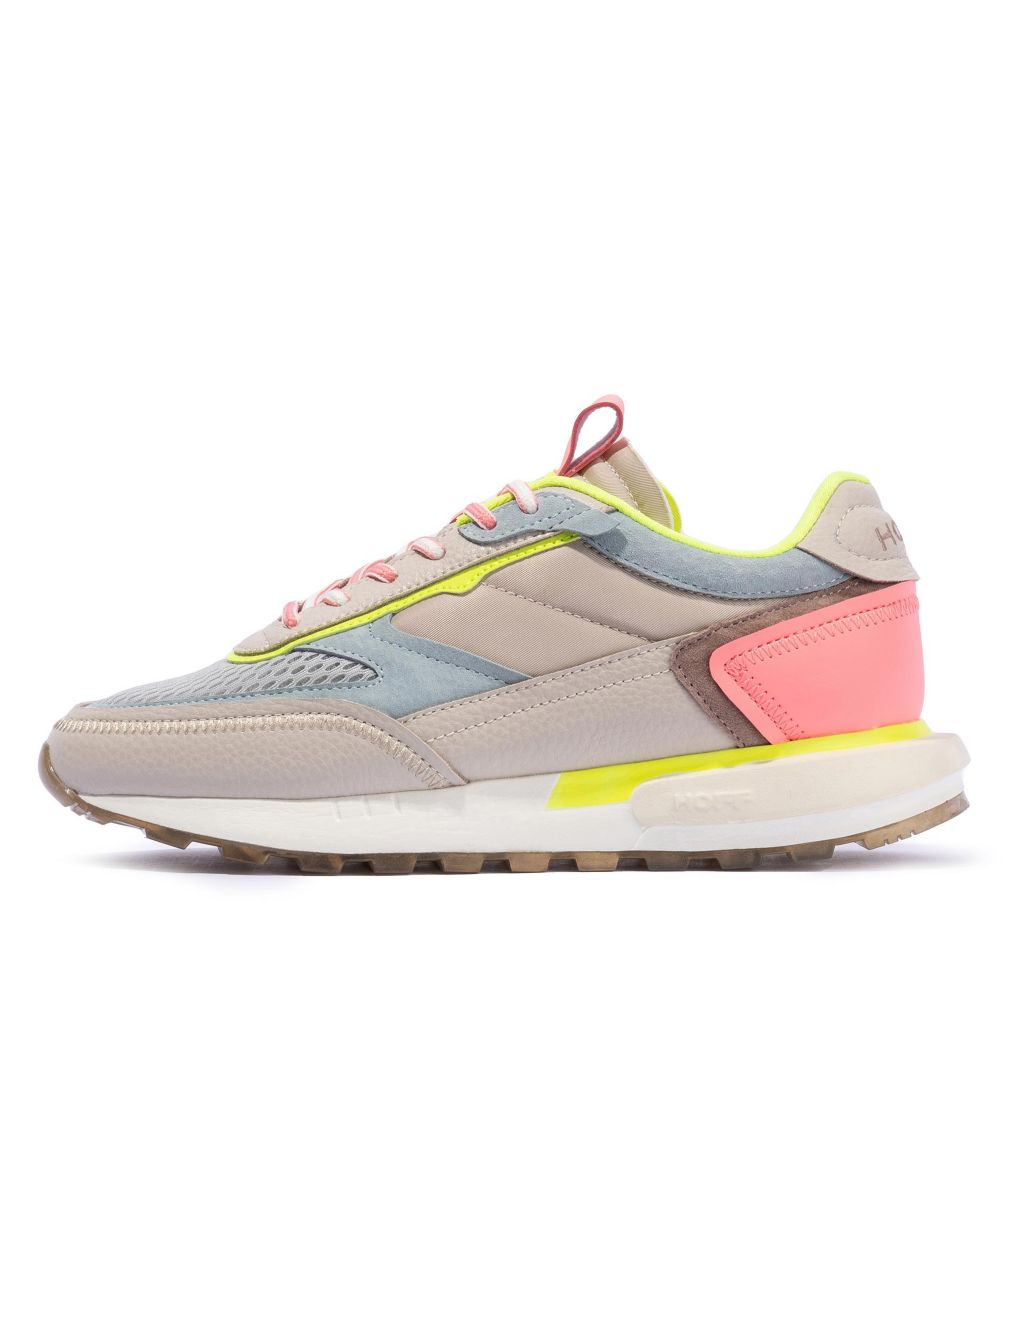 Tribe Trainers image 4